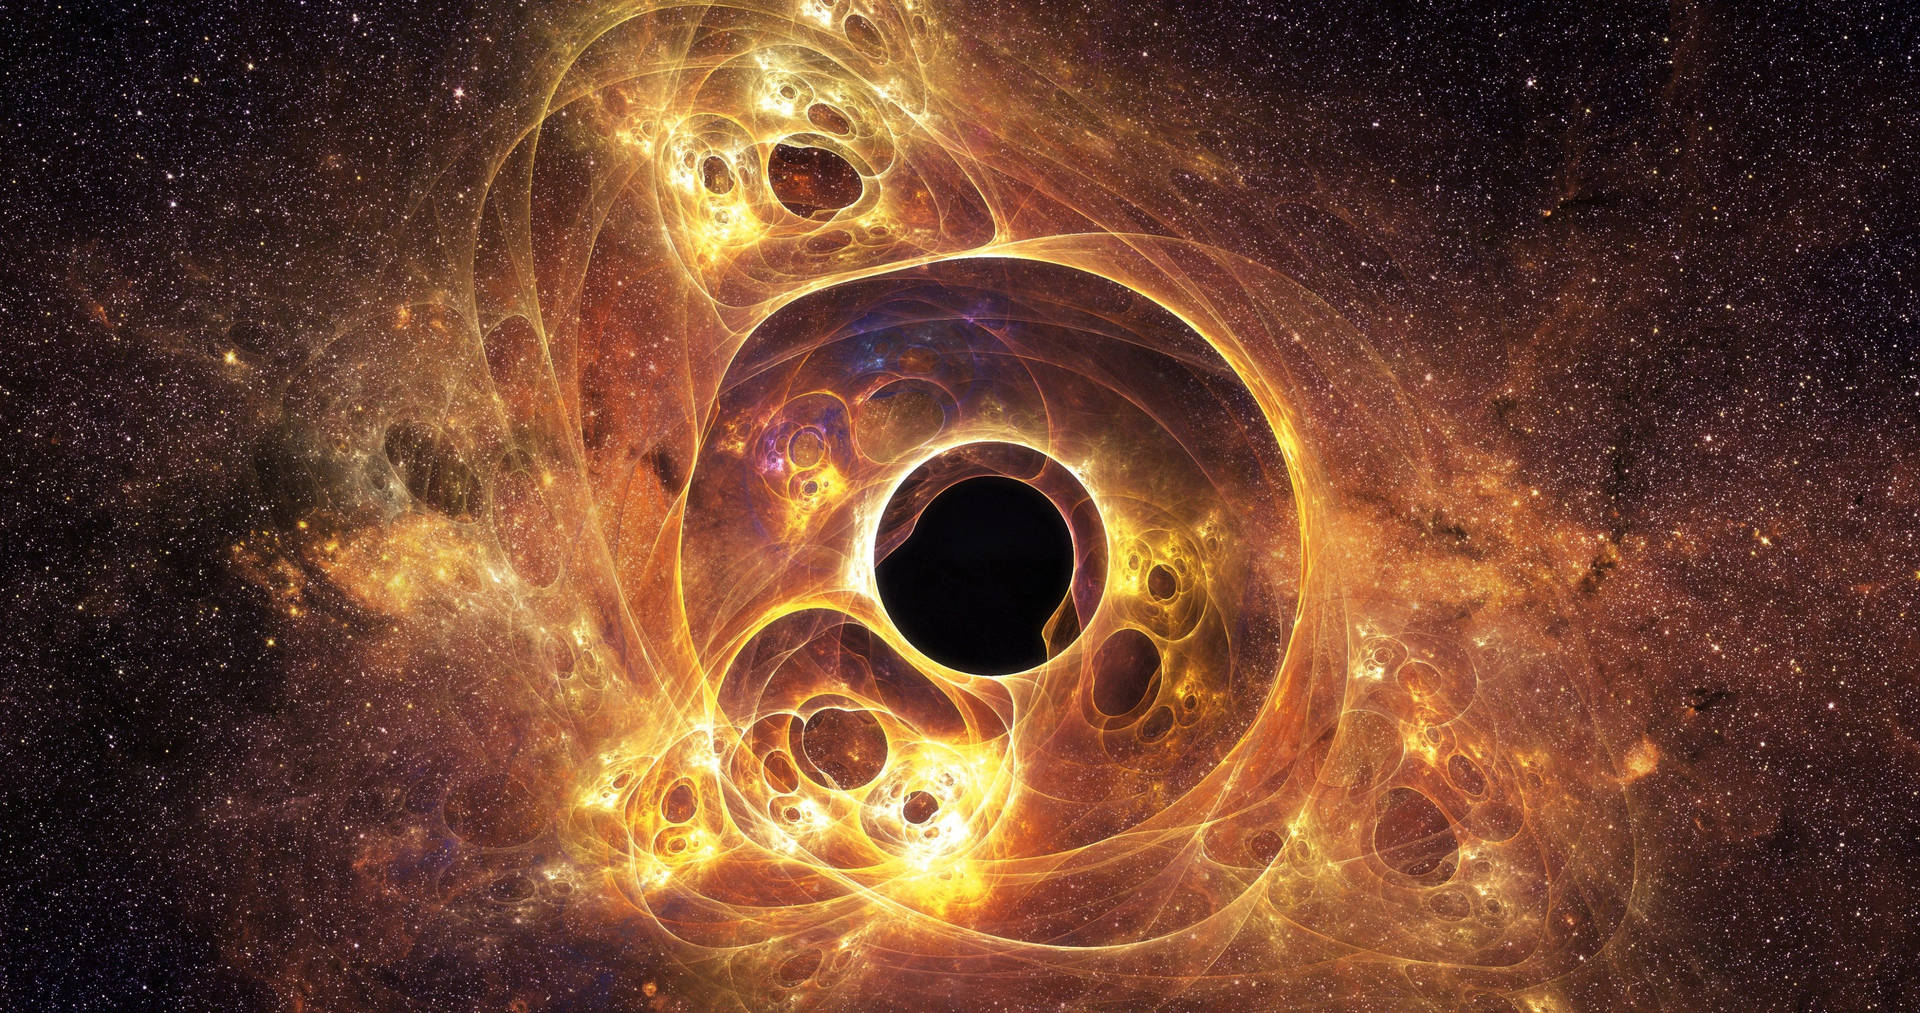 4096X2160 Black Hole Wallpaper and Background